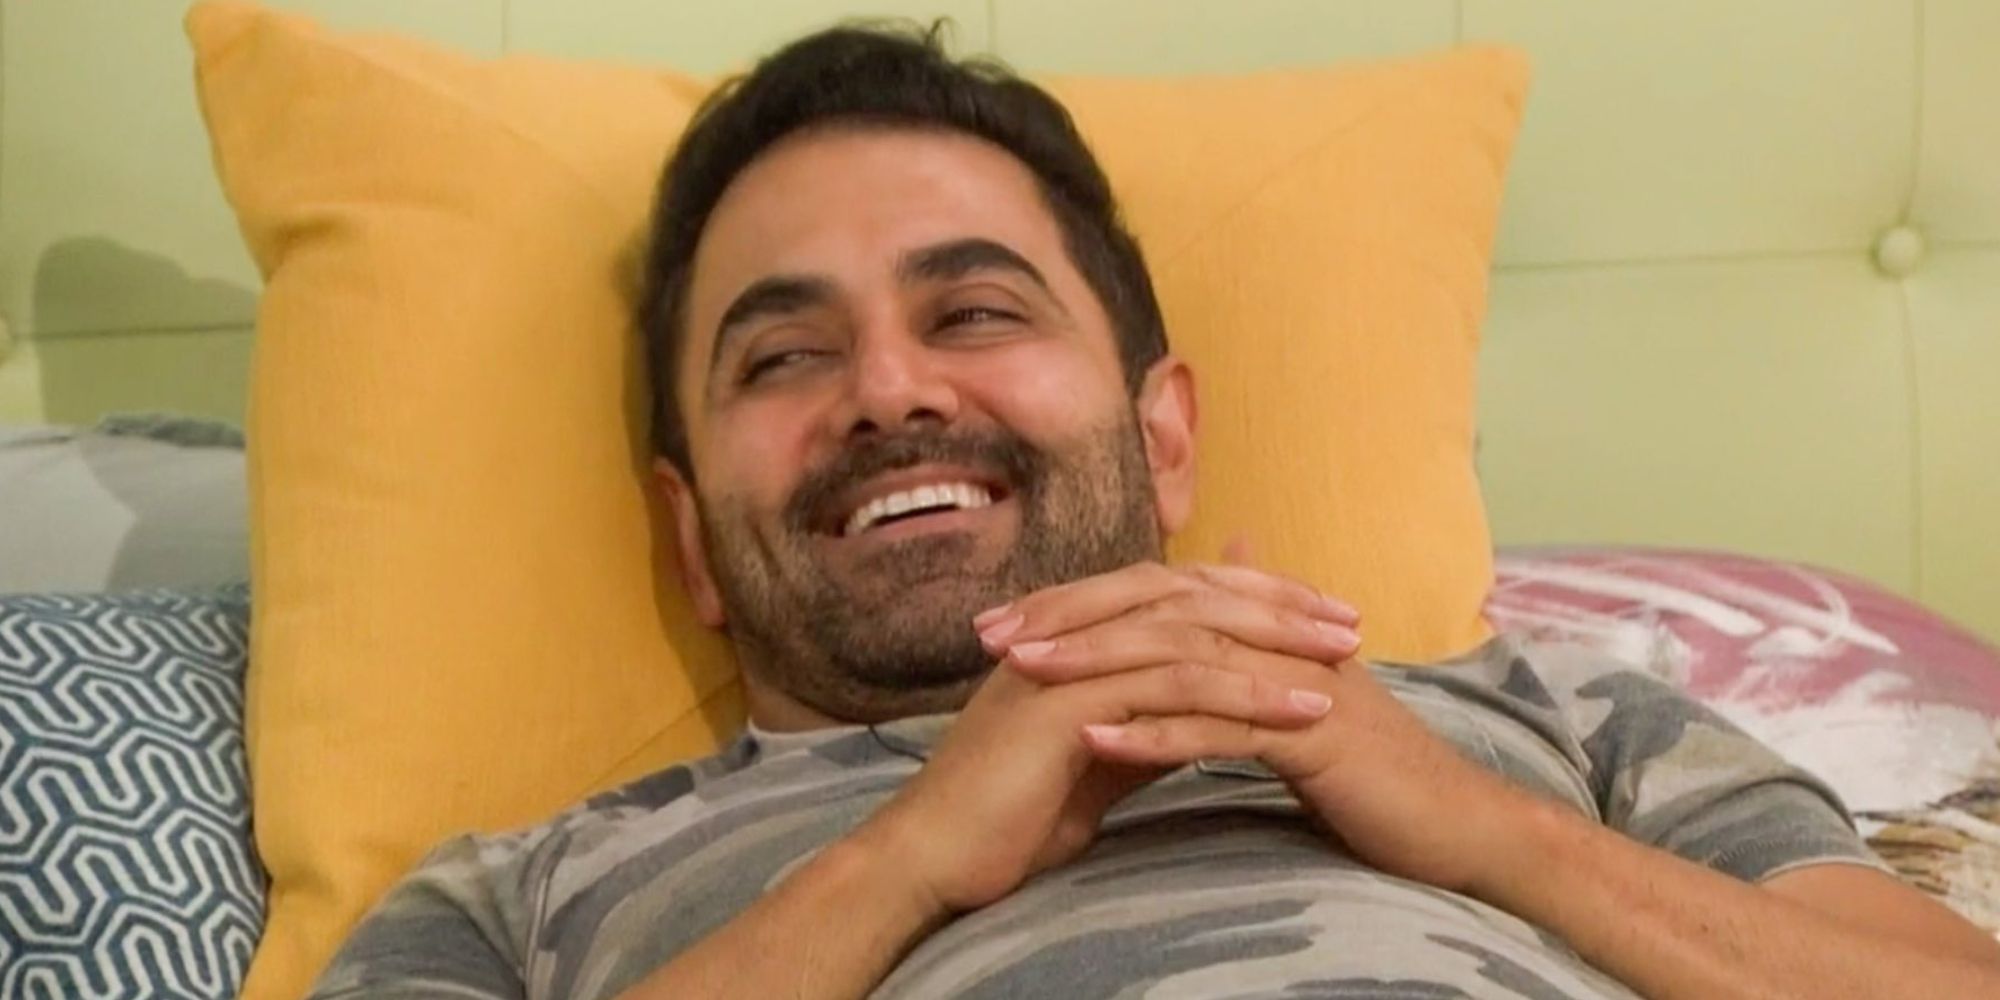 Kaysar living on the bed with his hands clasped together smiling and laughing